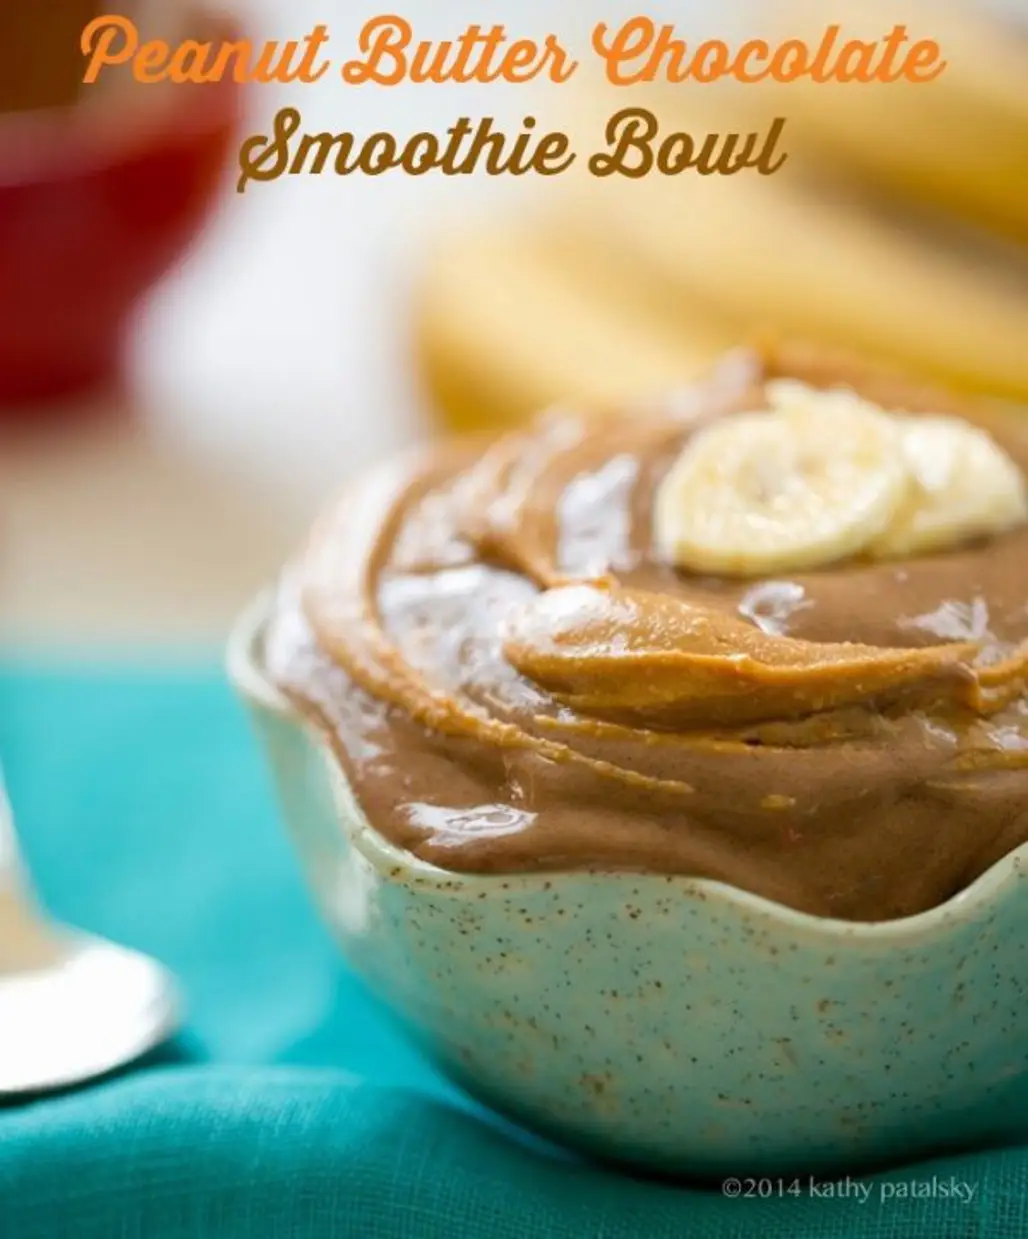 Peanut Butter Banana Chocolate Smoothie Bowl